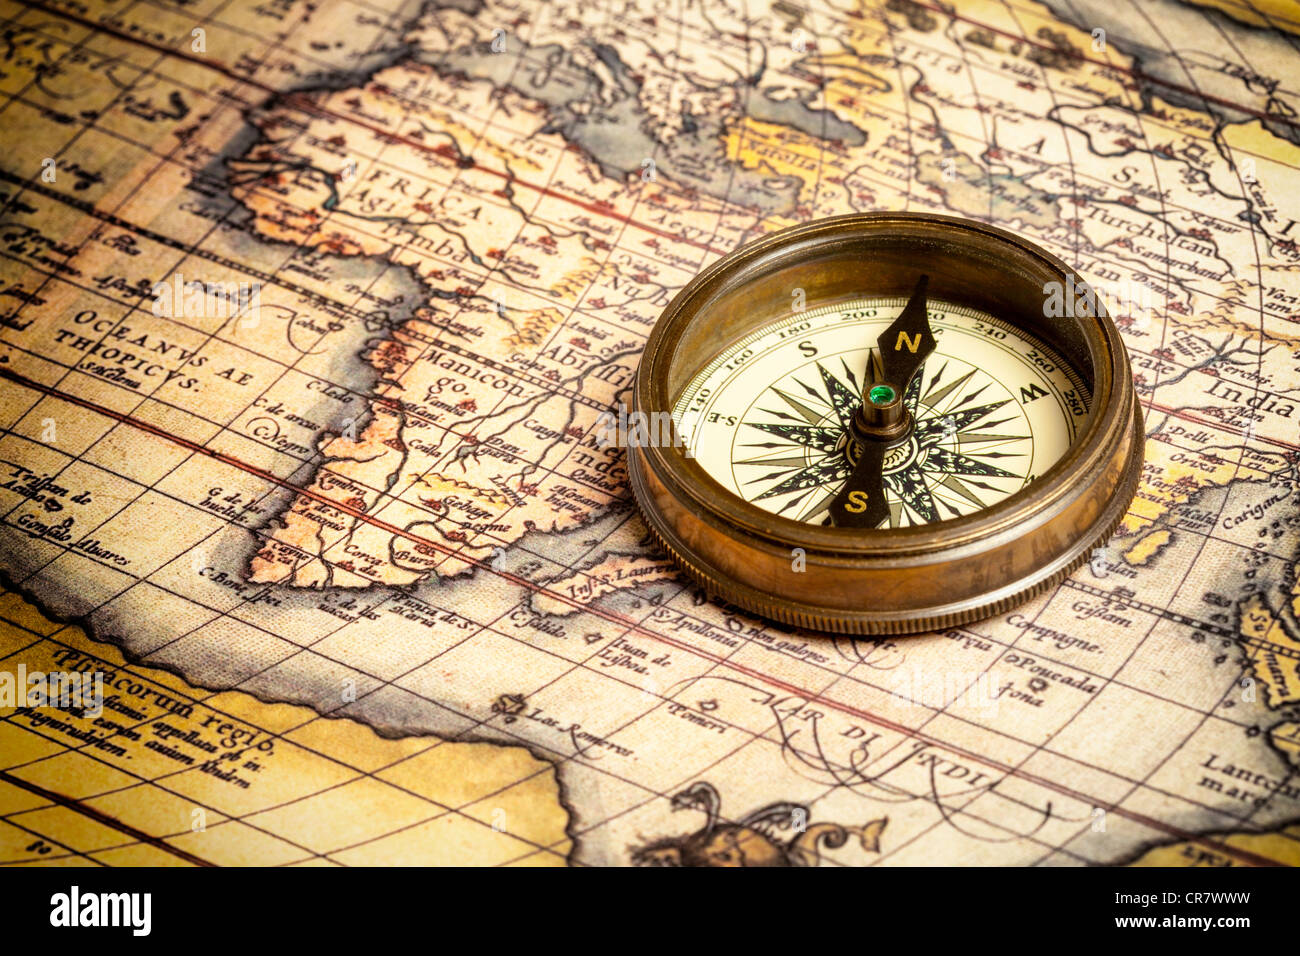 Old vintage retro compass on ancient map Stock Photo